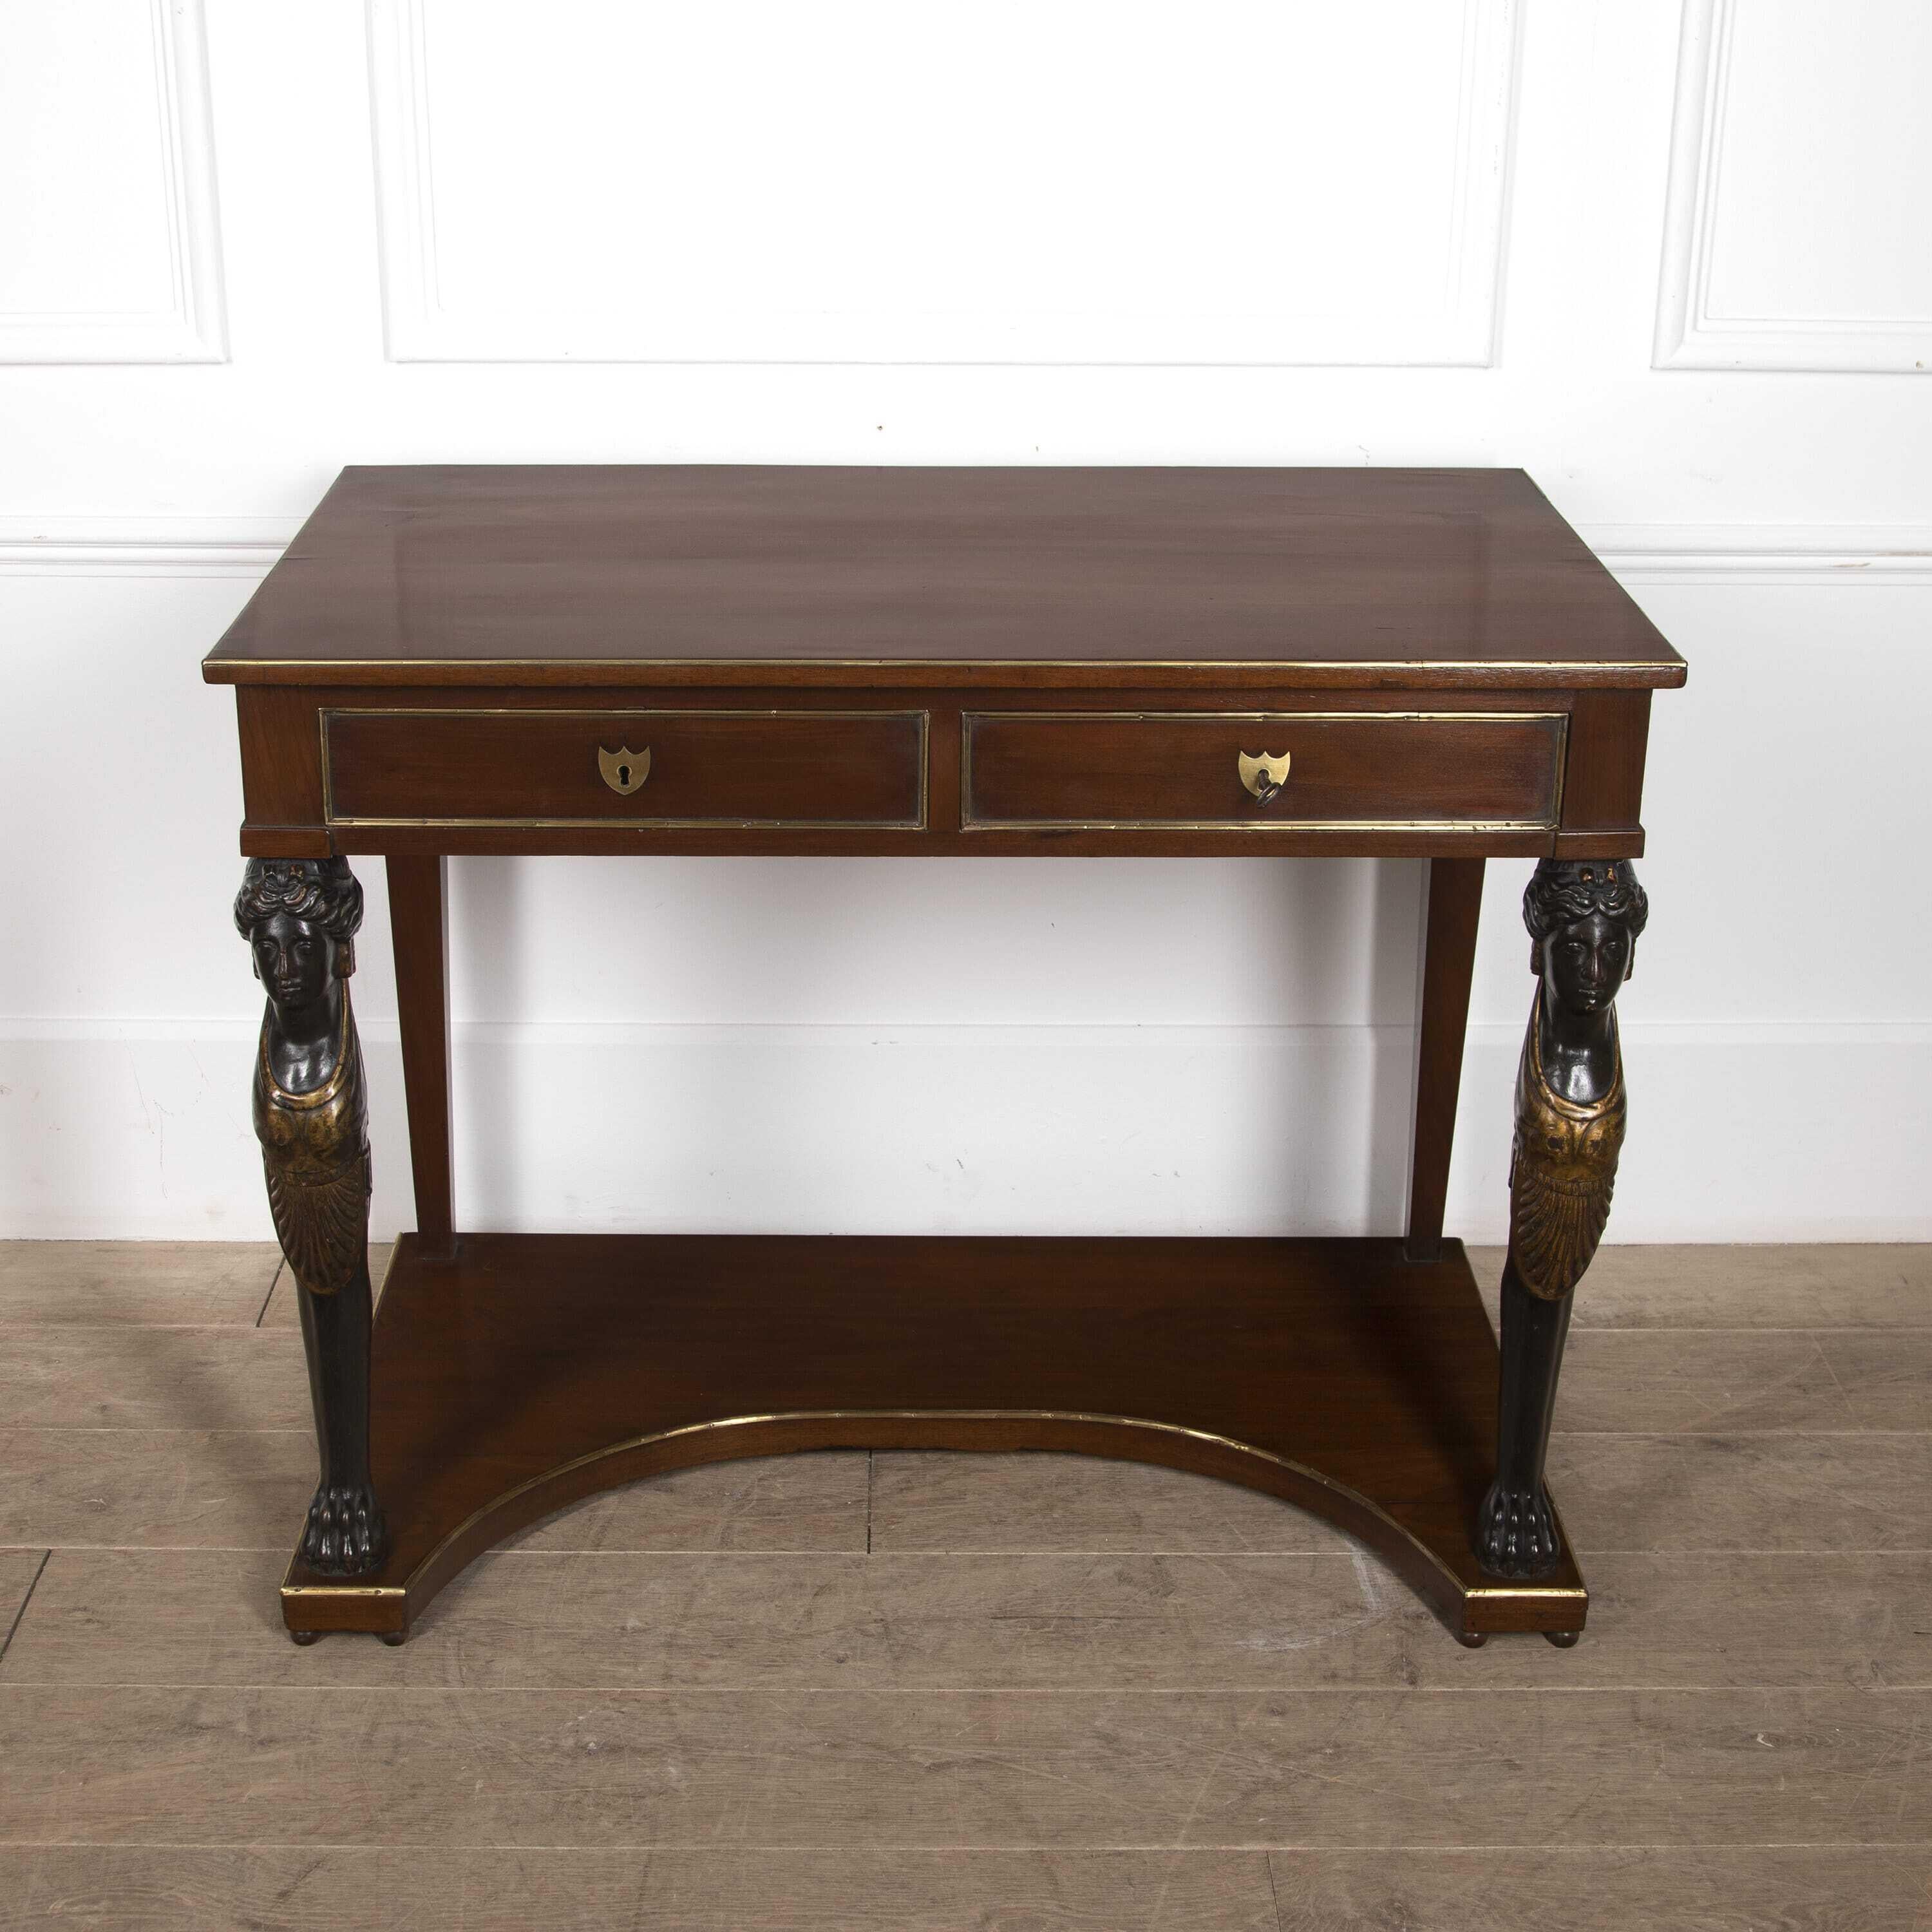 Early 19th century French console table with brass mouldings throughout.
The top has two drawers being supported by finely carved classical female monopodium legs that are ebonised and gilded sitting on carved lion paw feet above a concave base